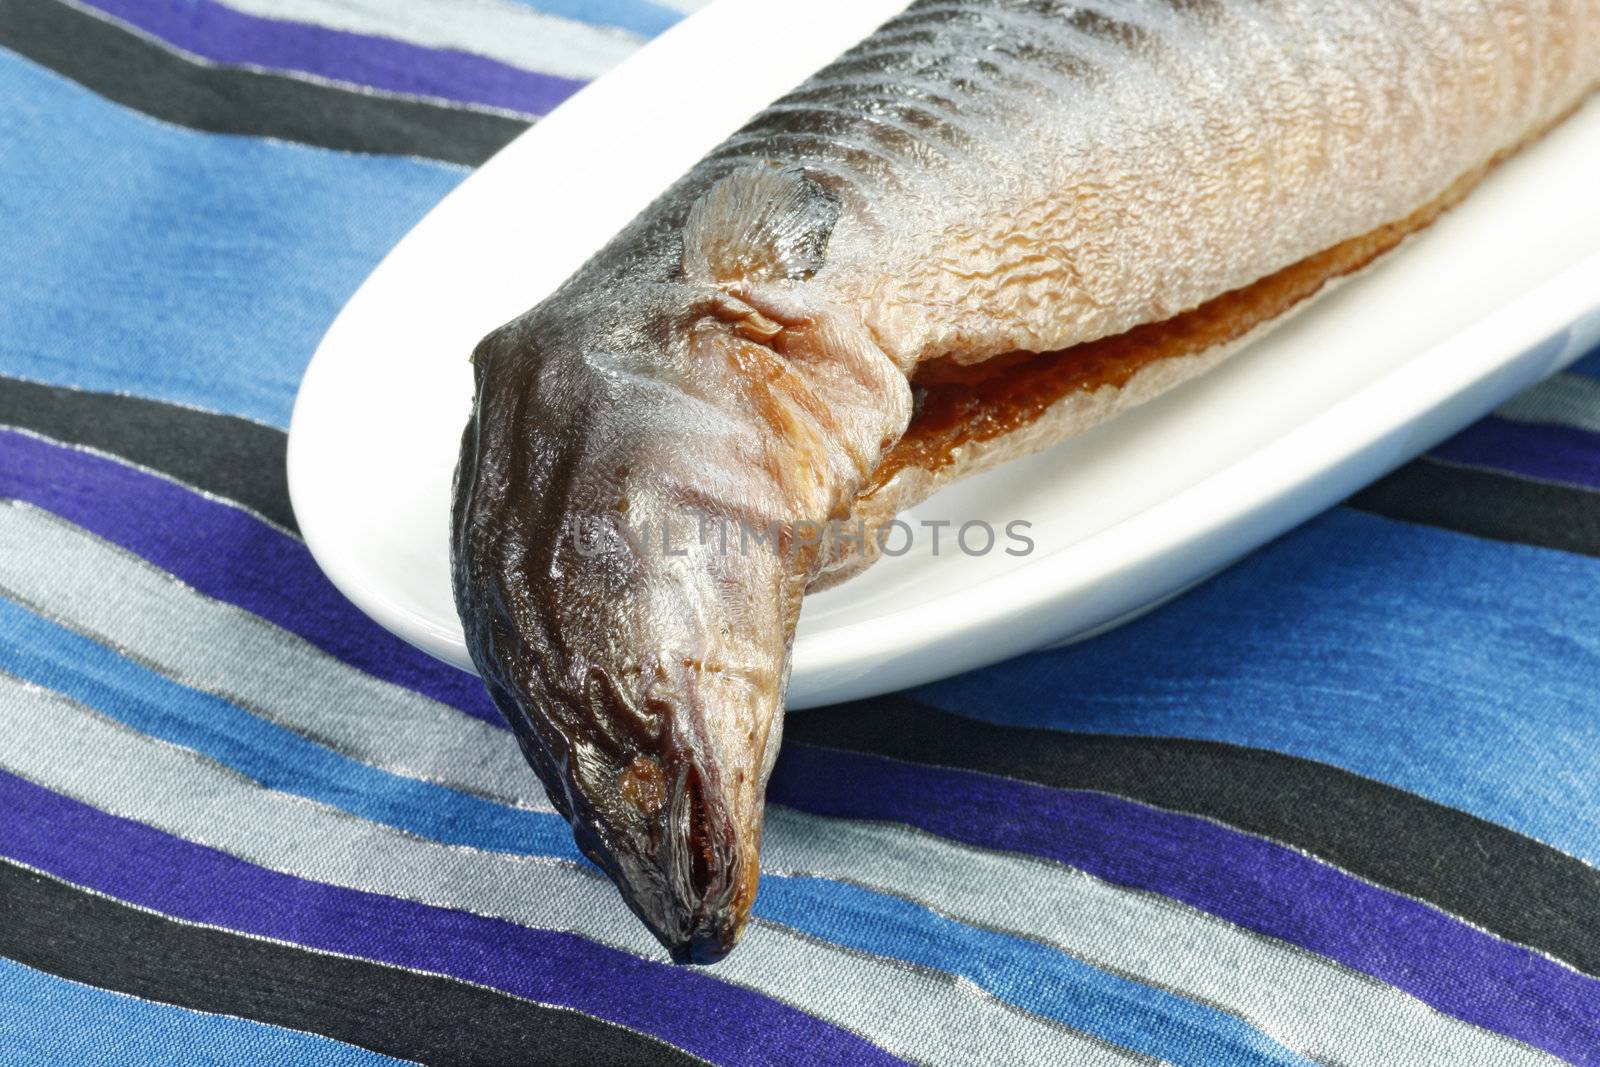 Whole smoked eel with garnish on a plate